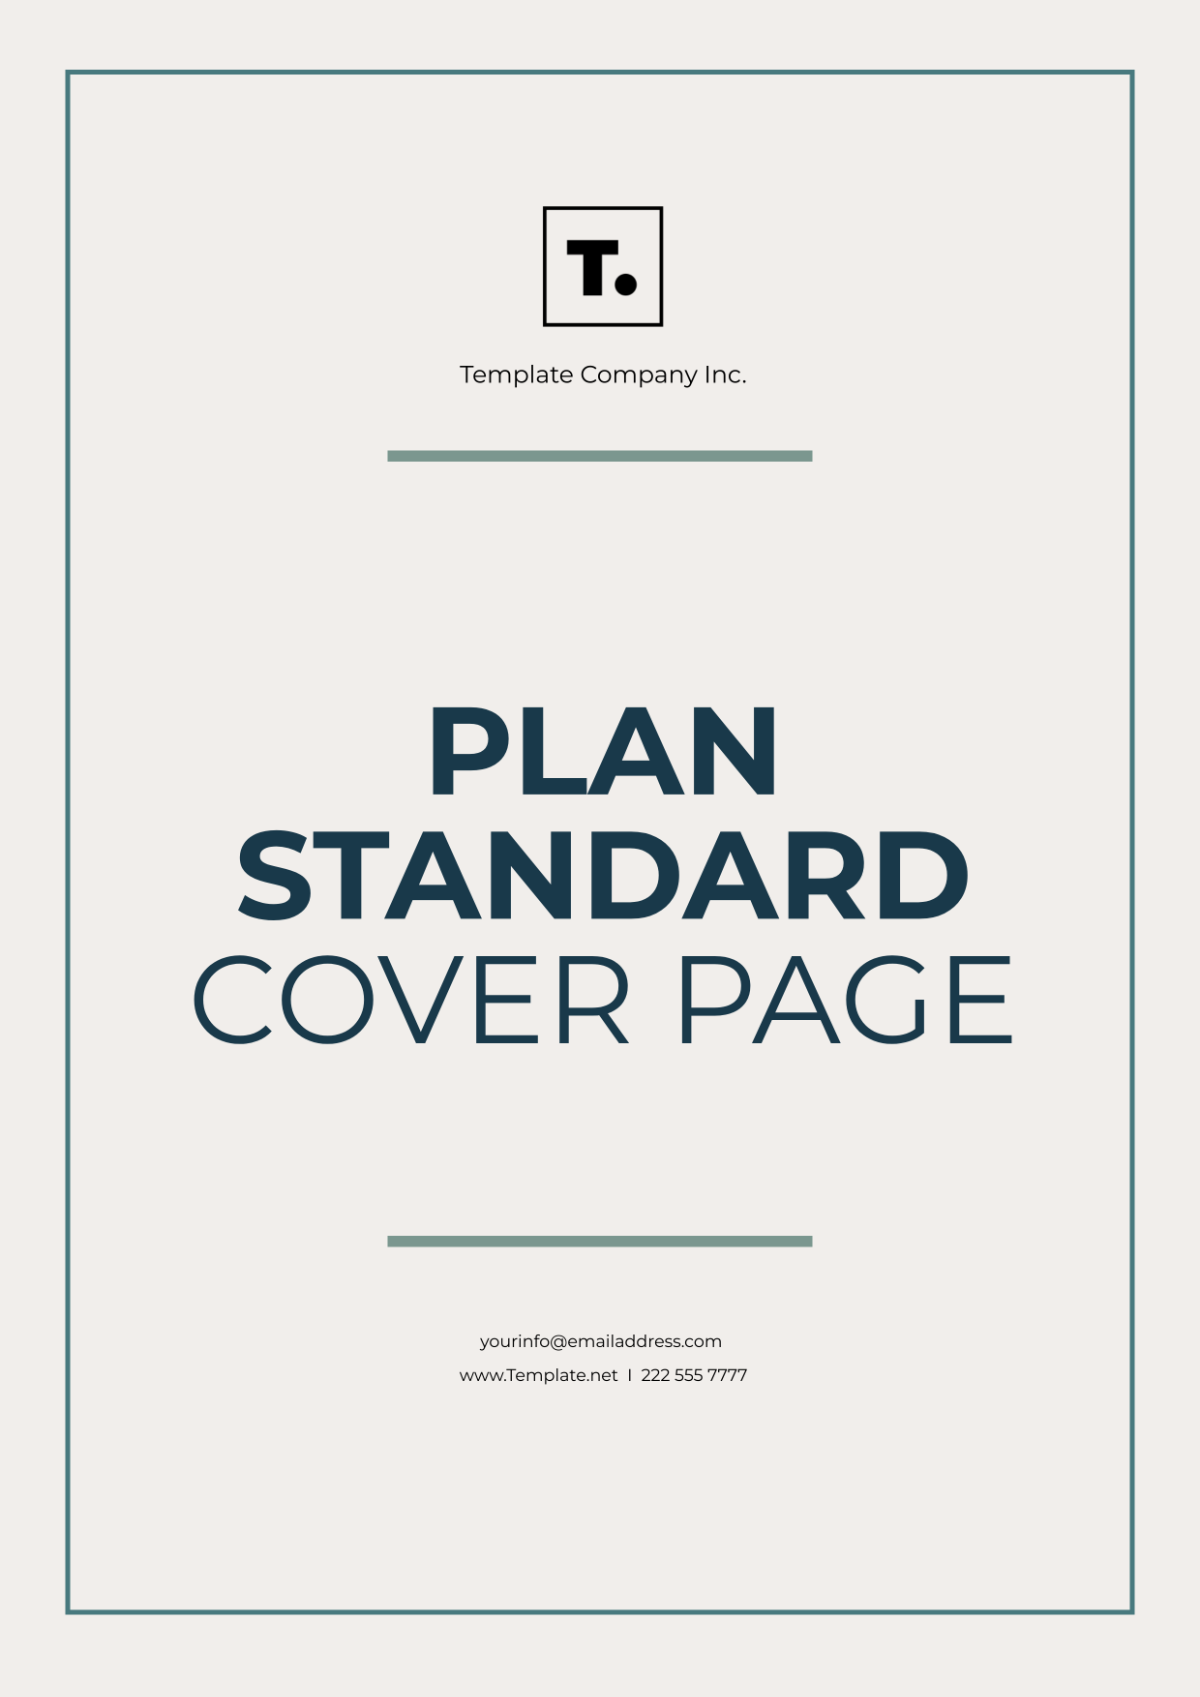 Plan Standard Cover Page